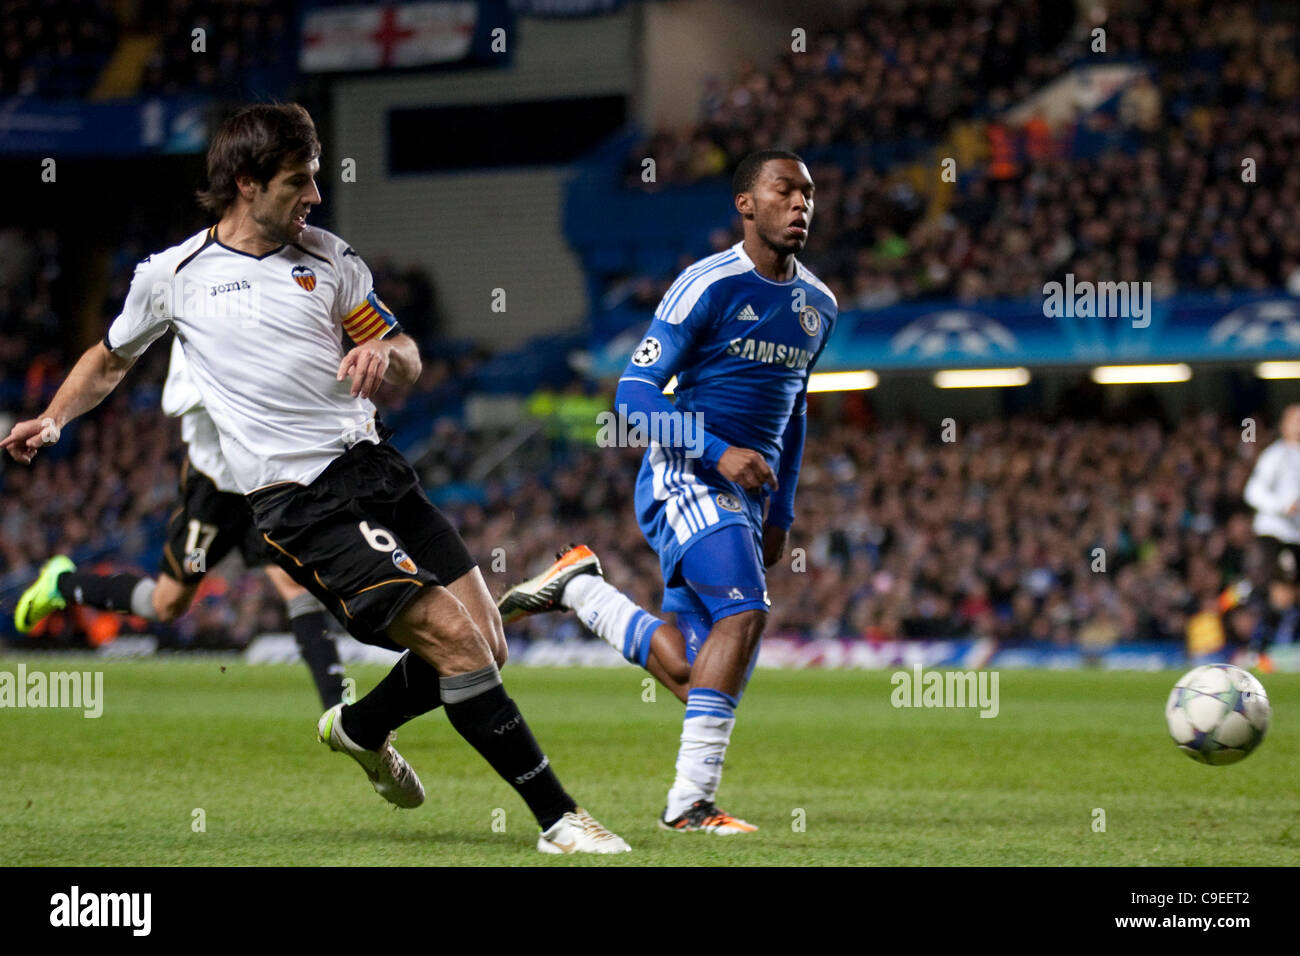 06.12.2011. London, England. Valencia's Spanish midfielder David Albelda  and Chelsea's English forward Daniel Sturridge in action during the UEFA Champions League group match between Chelsea and Valencia from Spain, played at Stamford Bridge Stadium. Stock Photo